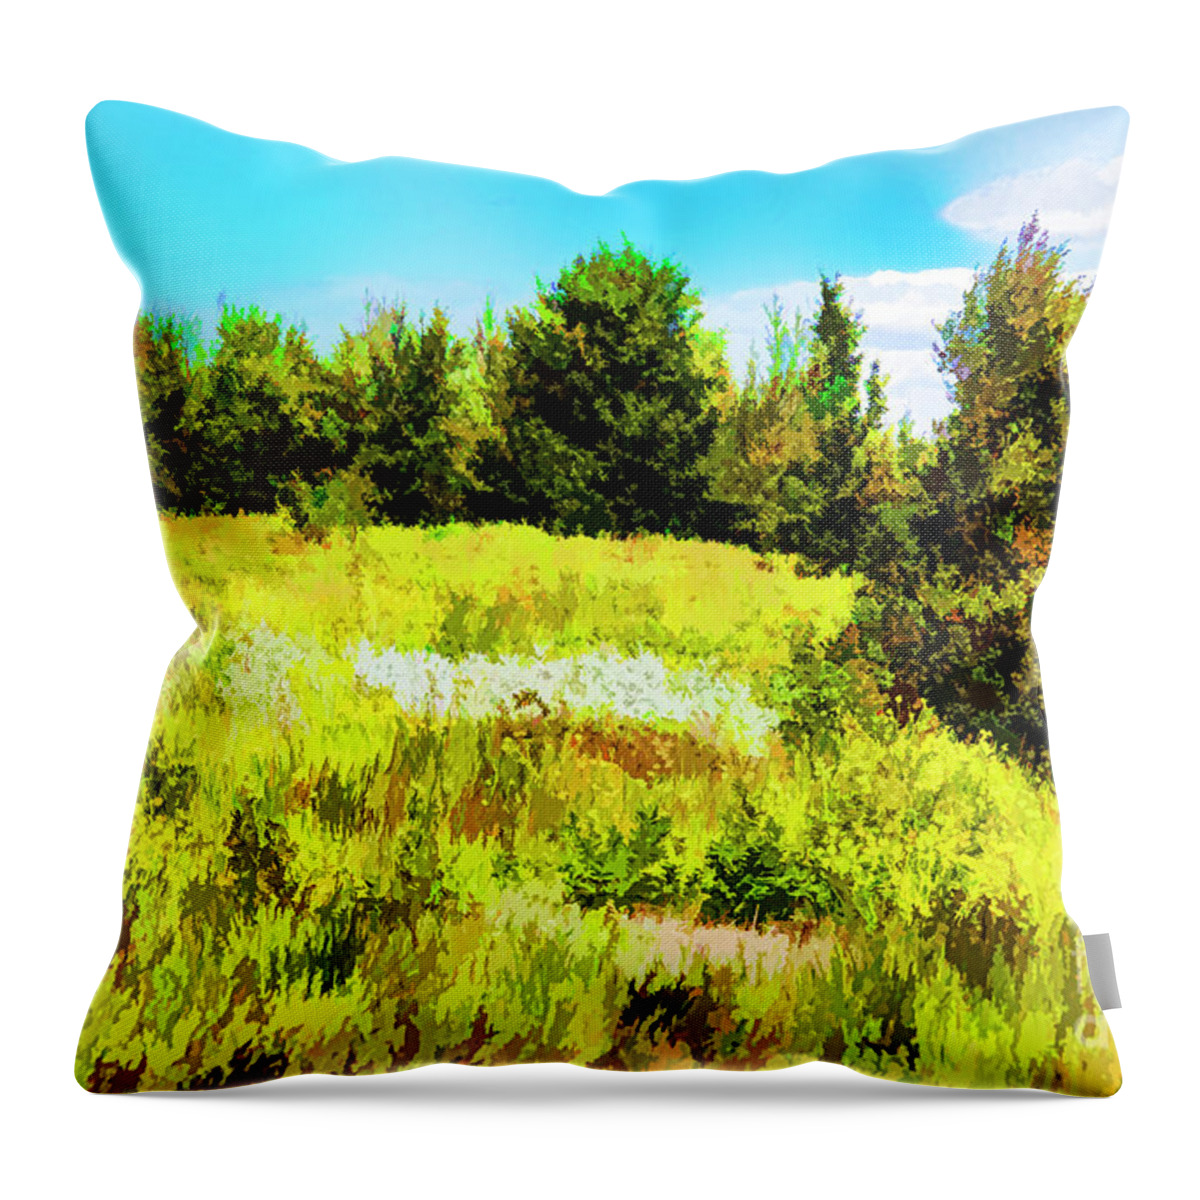 Landscapes Iceland Throw Pillow featuring the digital art Yellow Hill by Rick Bragan